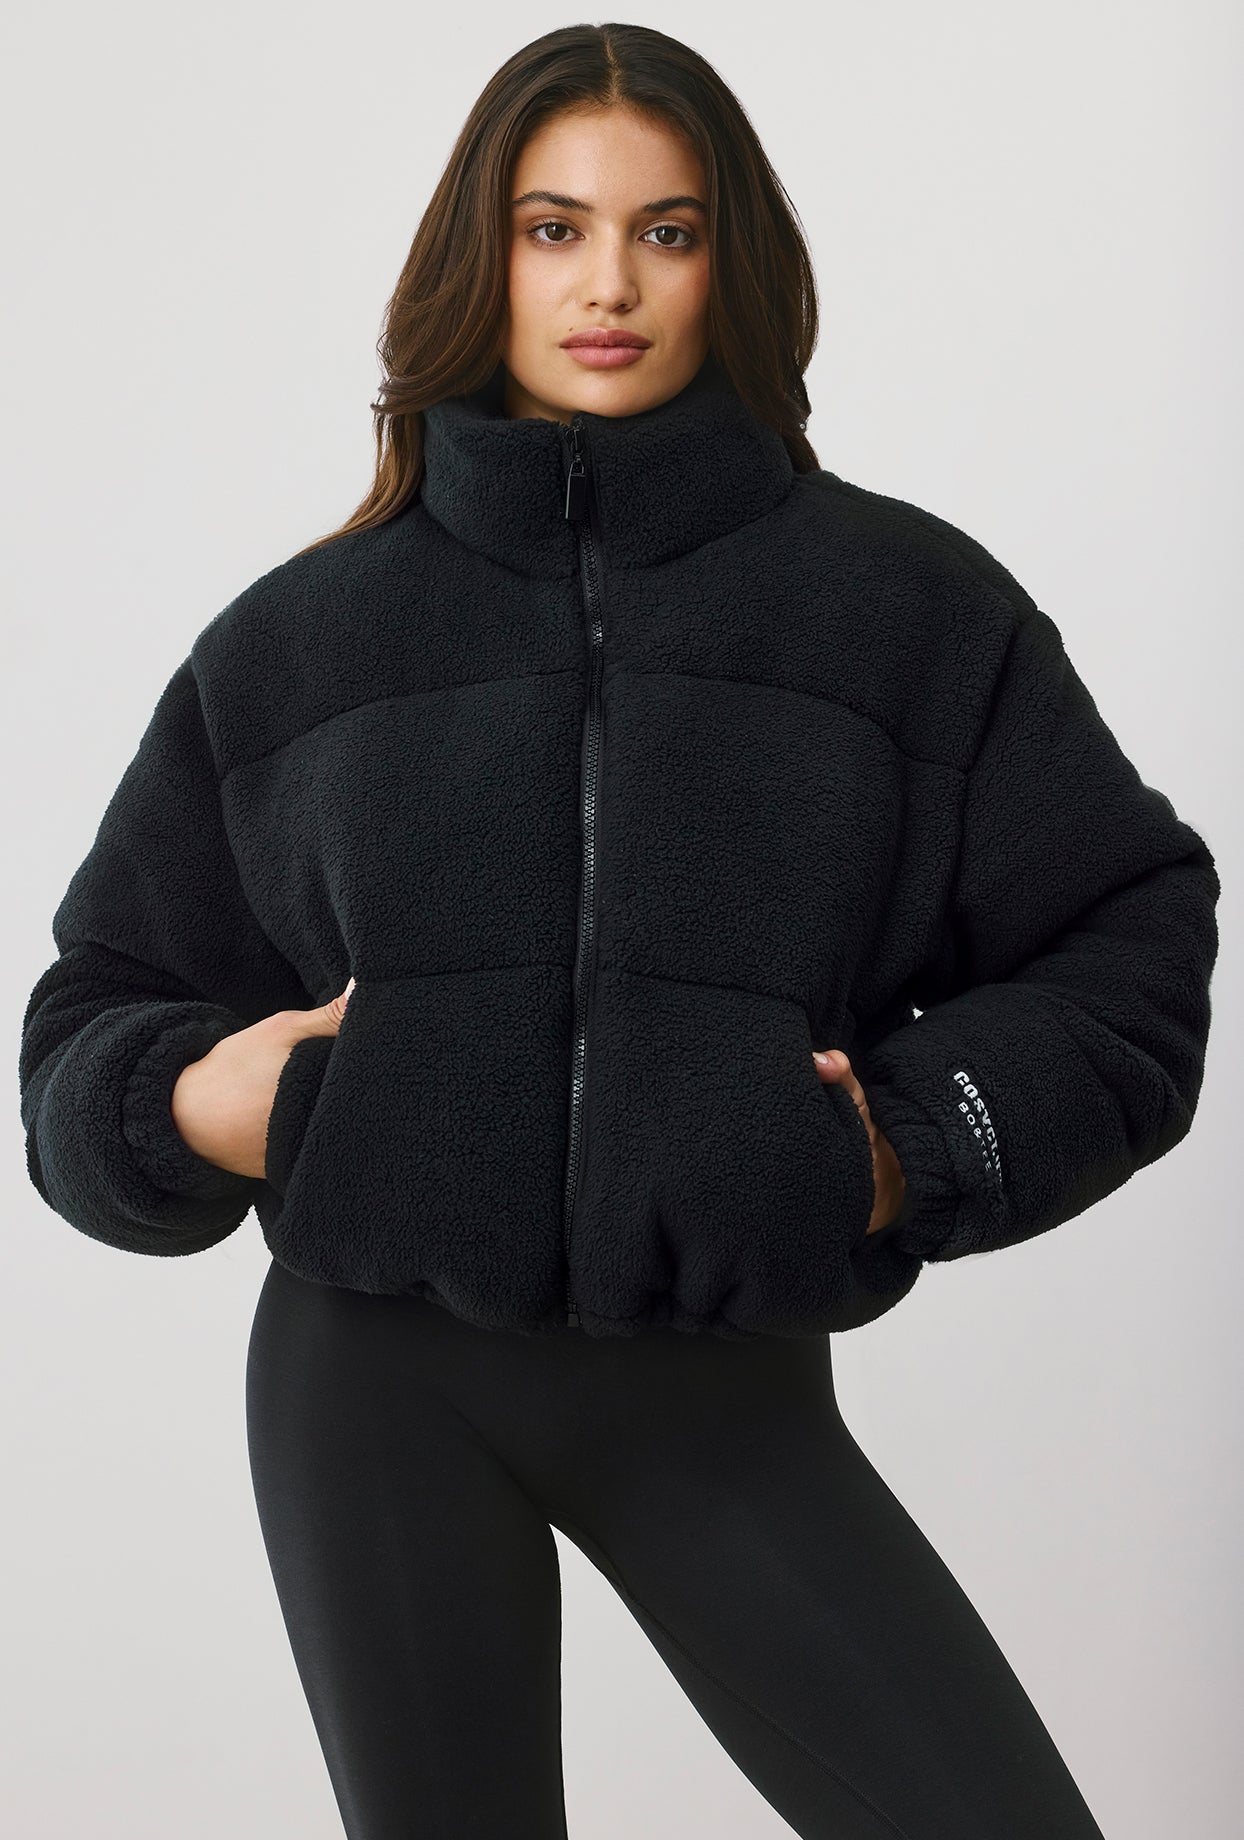 Wrap Up - Puffer Jacket in Onyx